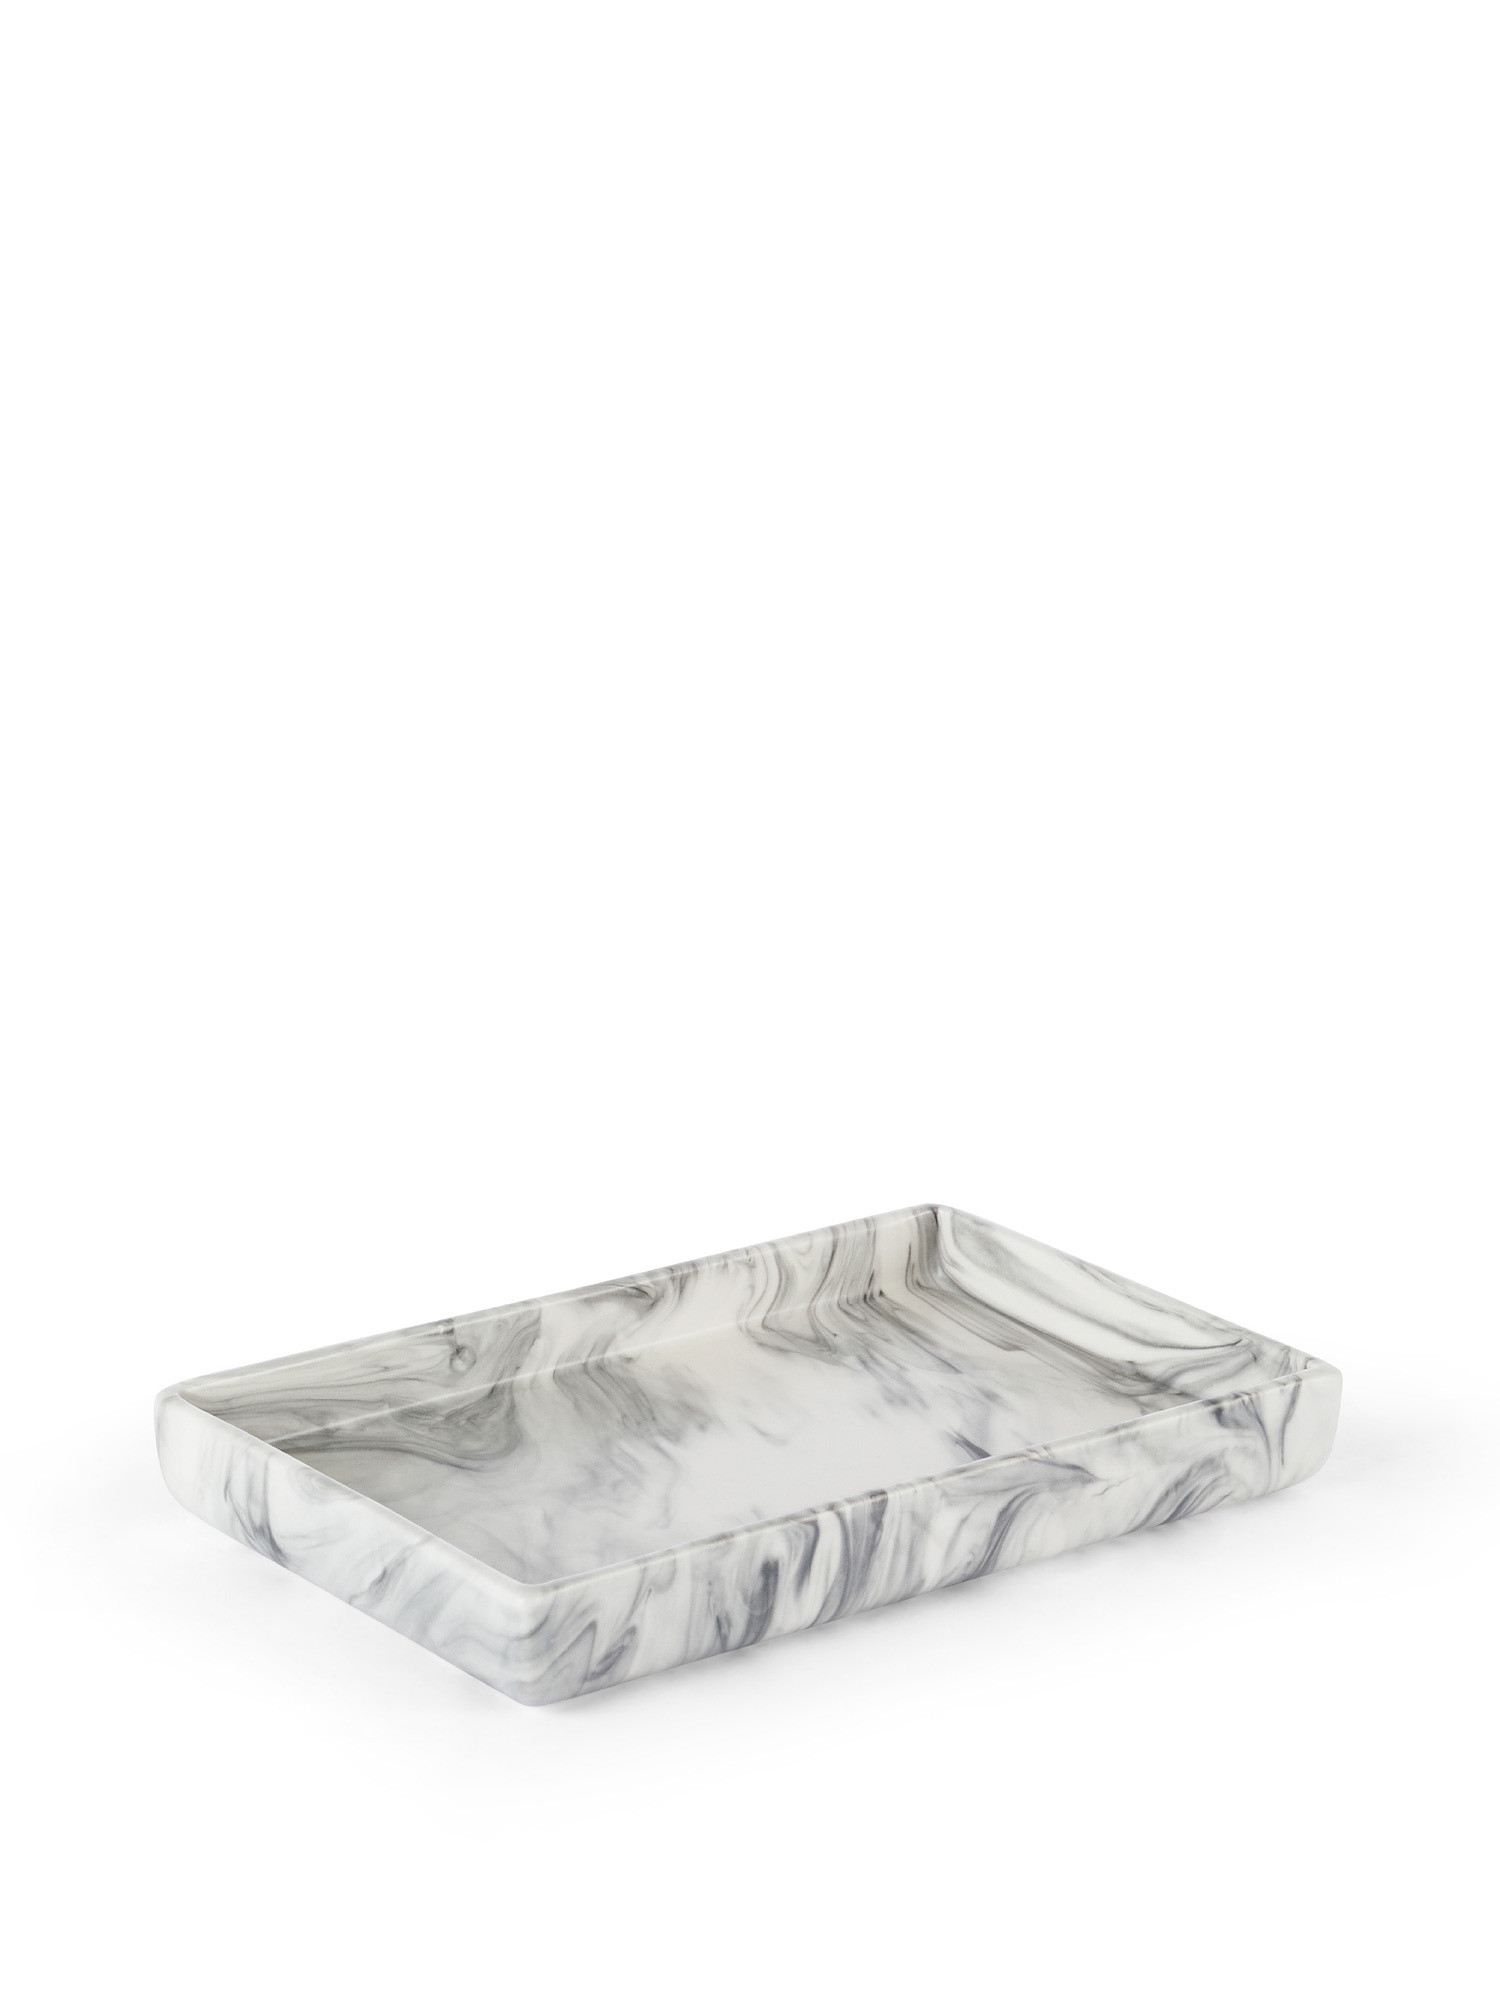 Portuguese ceramic tray with marble effect, White Black, large image number 0